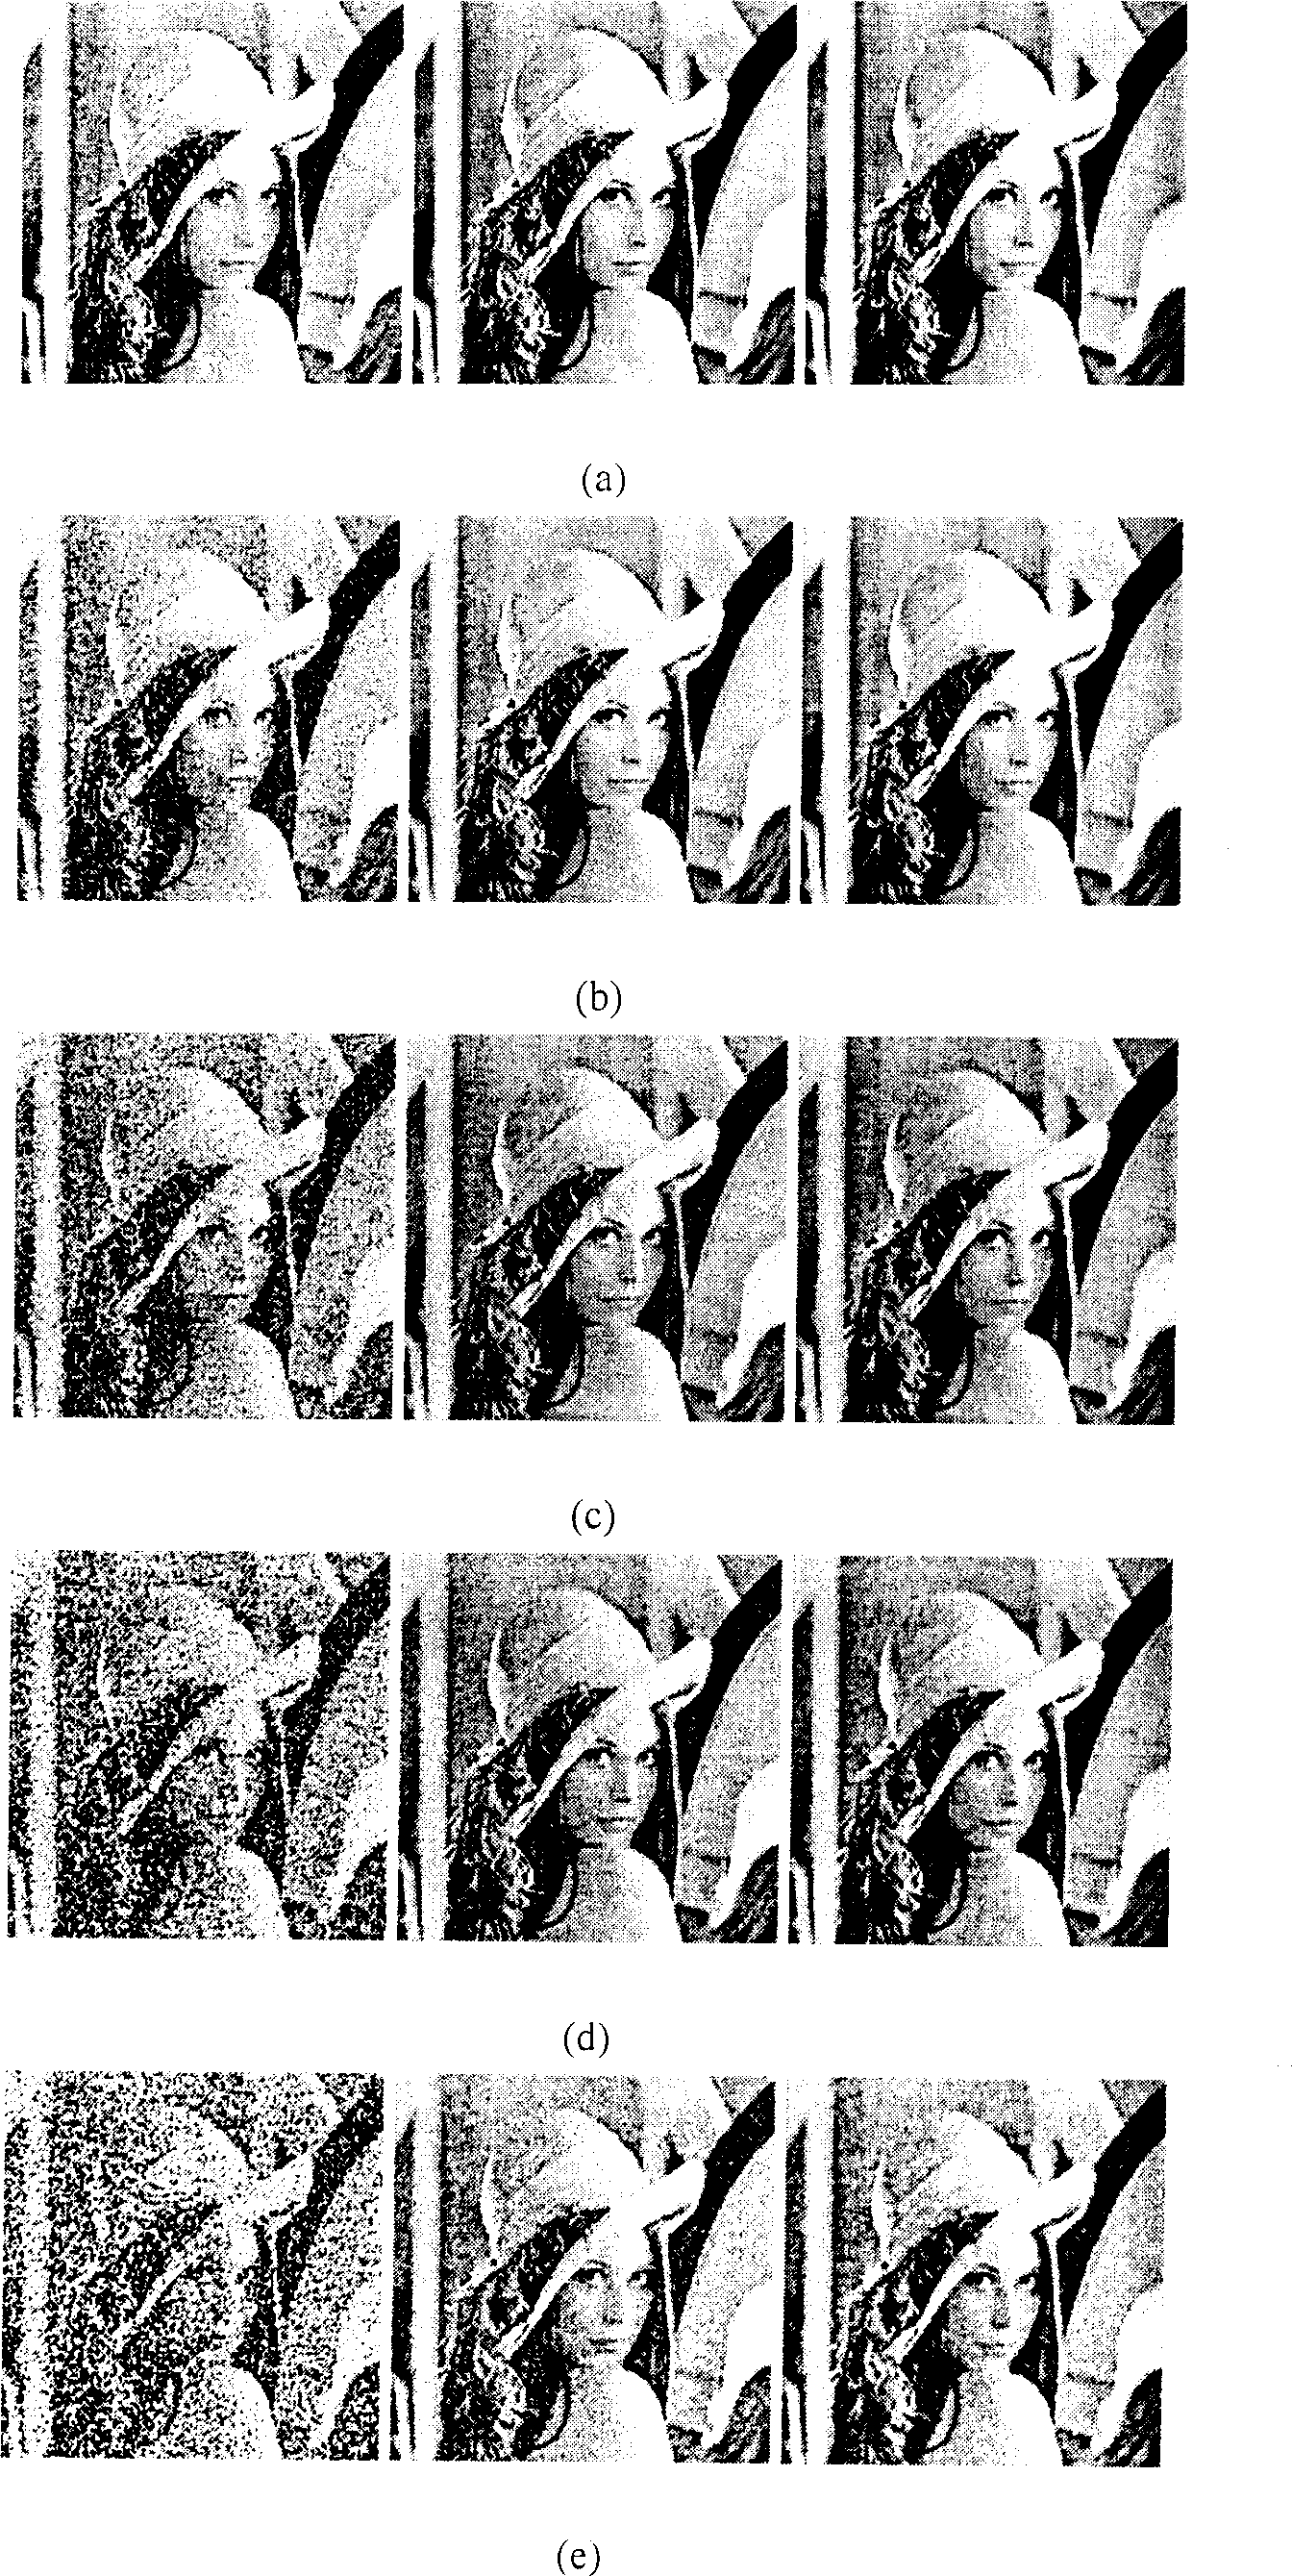 Method of reducing noise for combined images